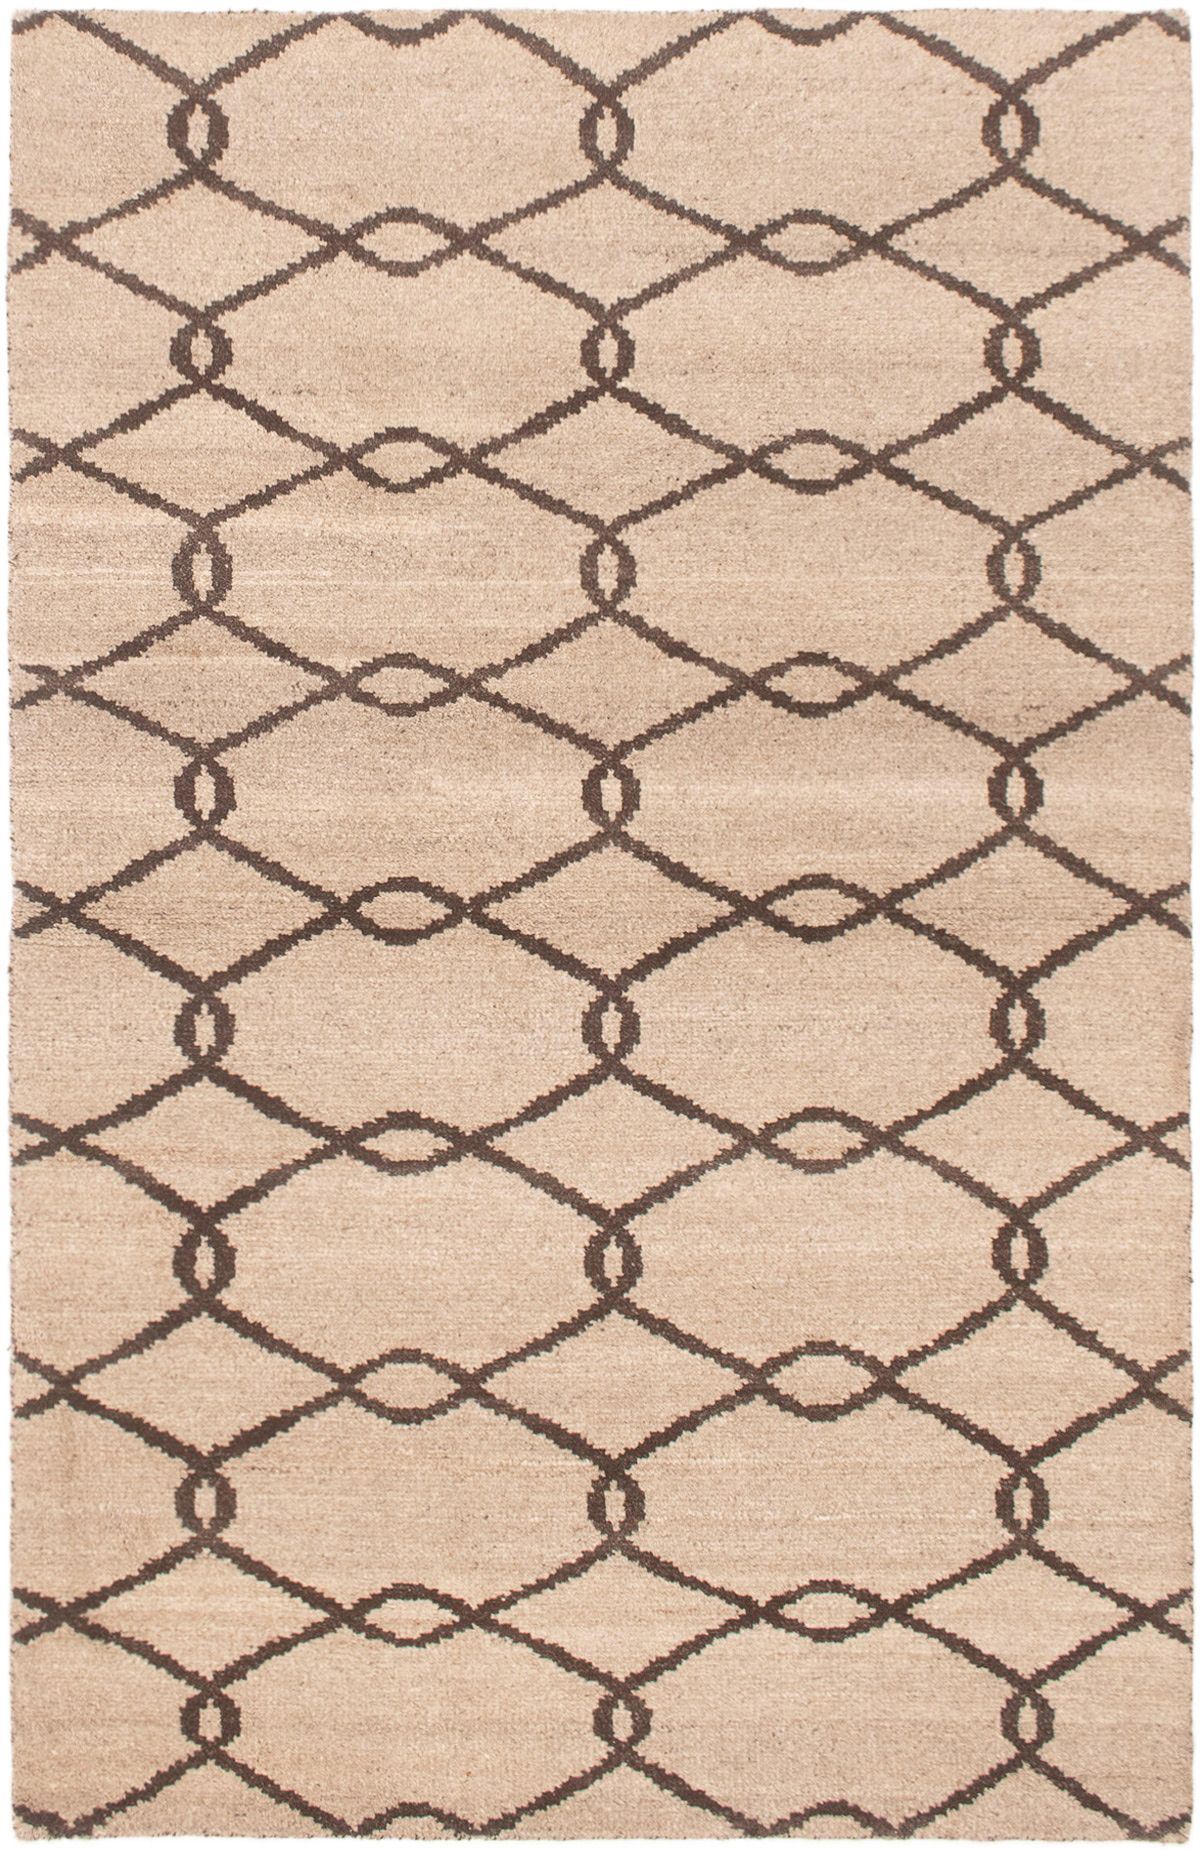 Hand-knotted Tangier Light Khaki Wool Rug 5'1" x 7'11" Size: 5'1" x 7'11"  